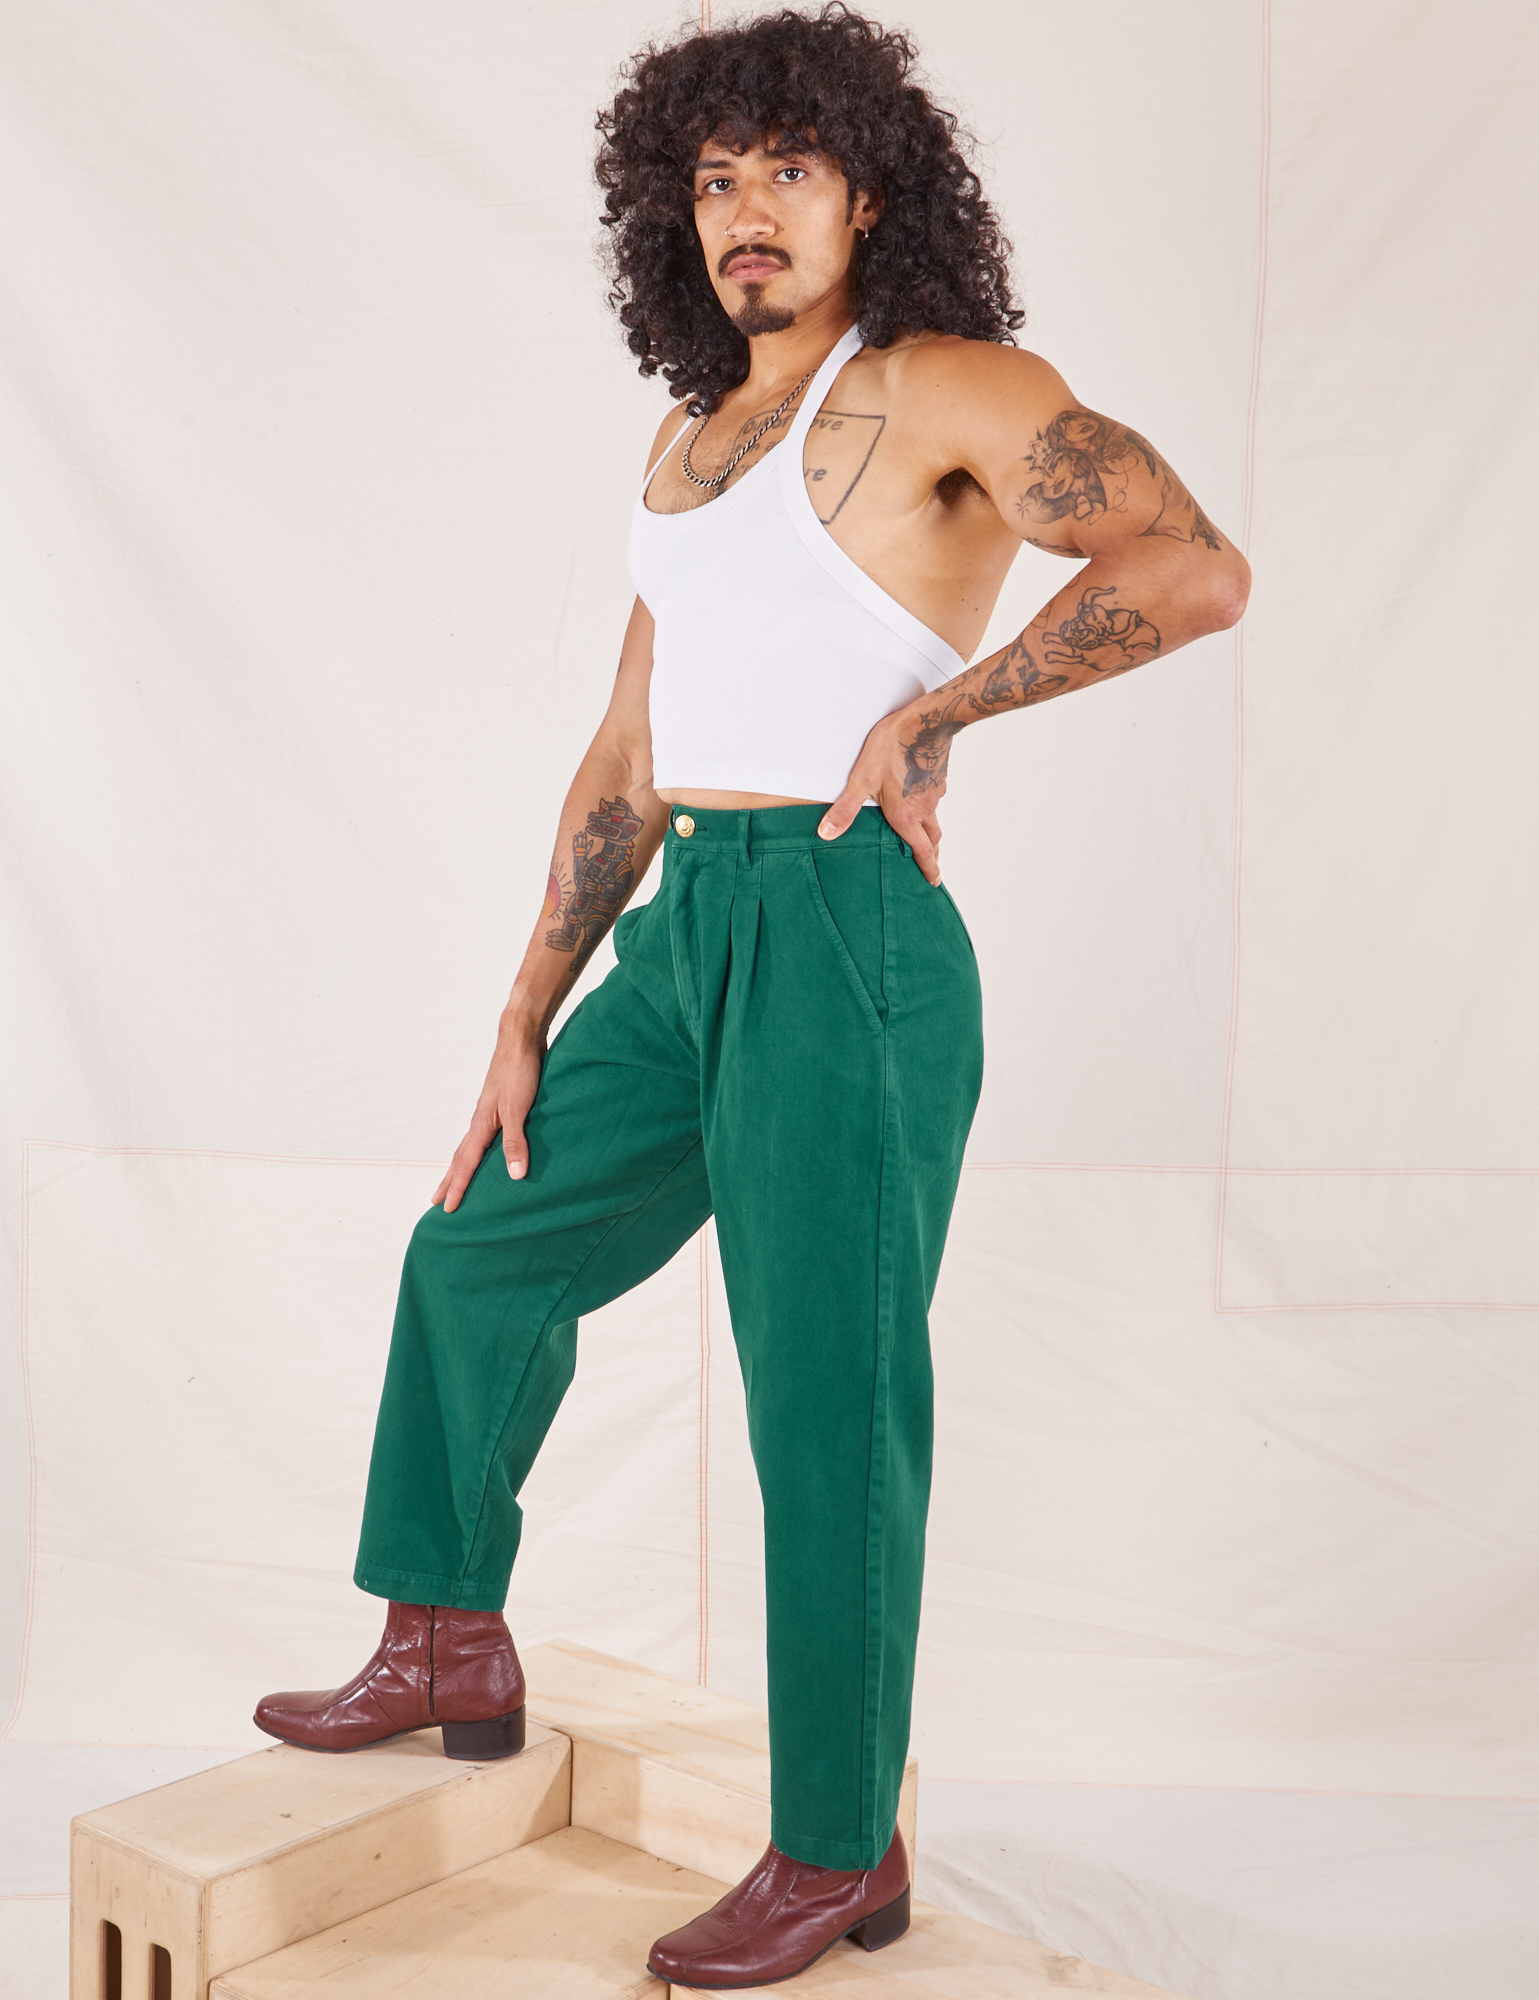 Jesse is wearing Heavyweight Trousers in Hunter Green and Halter Top in vintage tee off-white